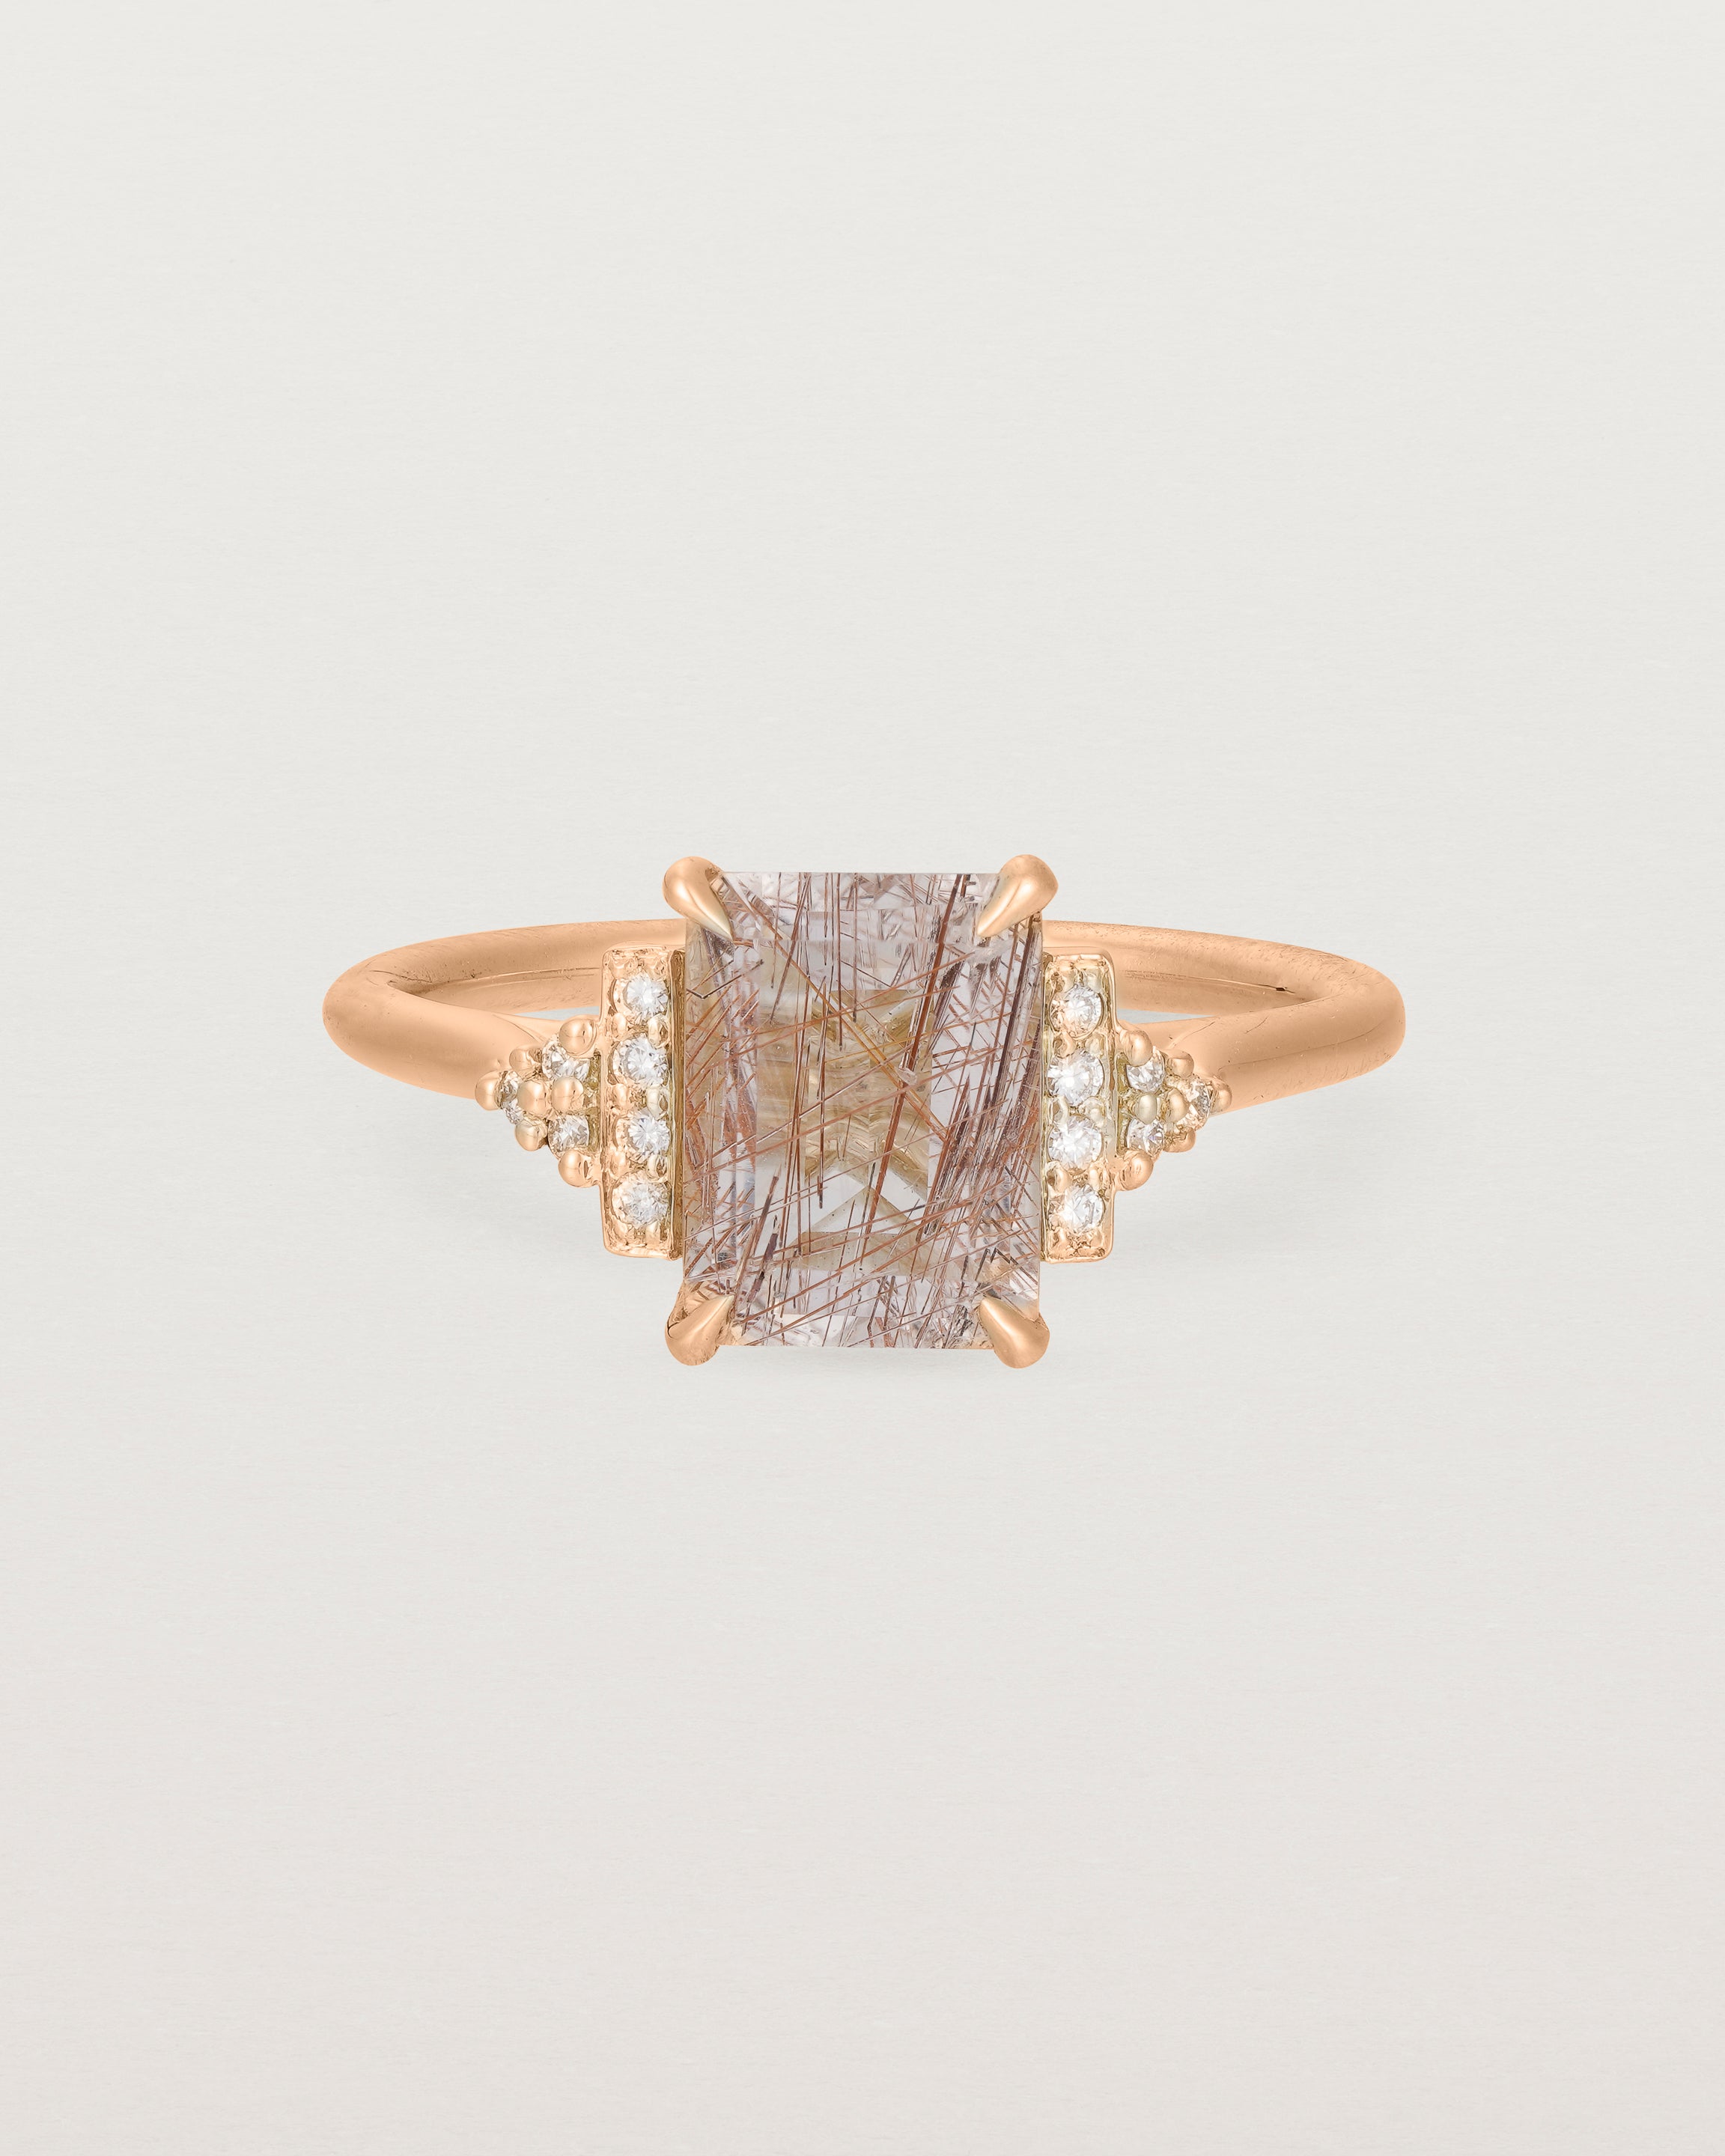 Front view of the Elodie Ring featuring a emerald cut rutilated quartz in yellow gold